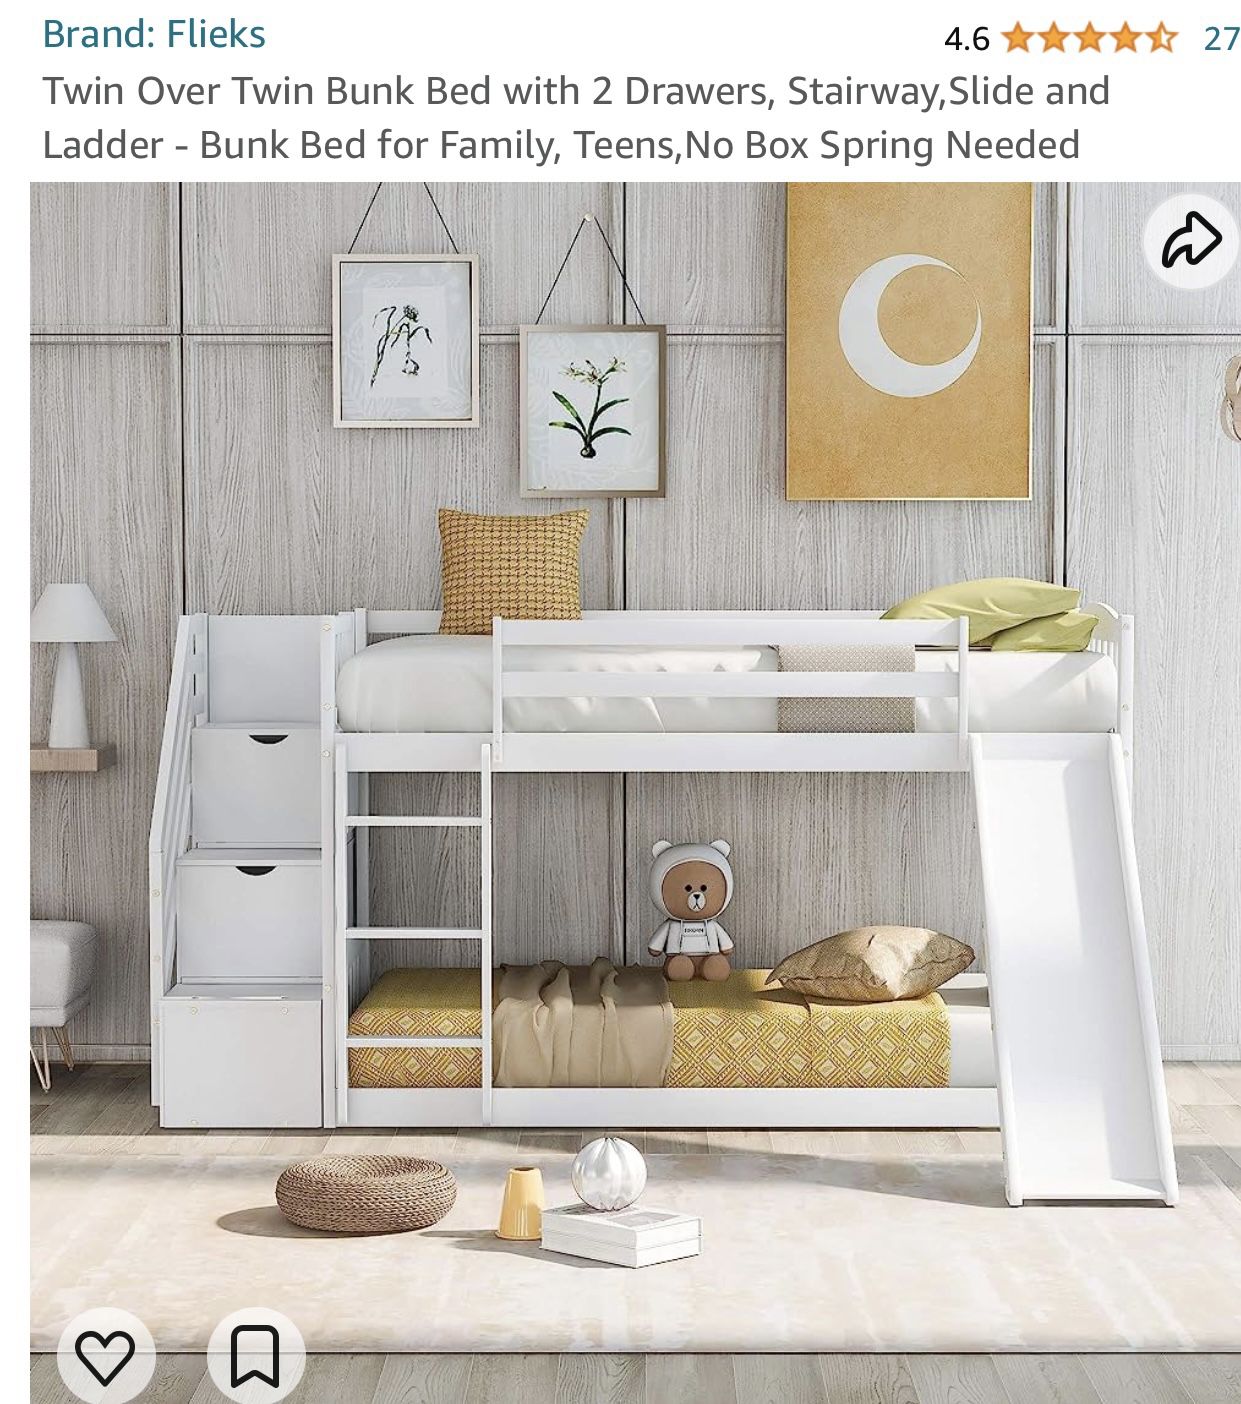 Twin Over Twin Bunk Bed with 2 Drawers, Stairway ,Slide and Ladder